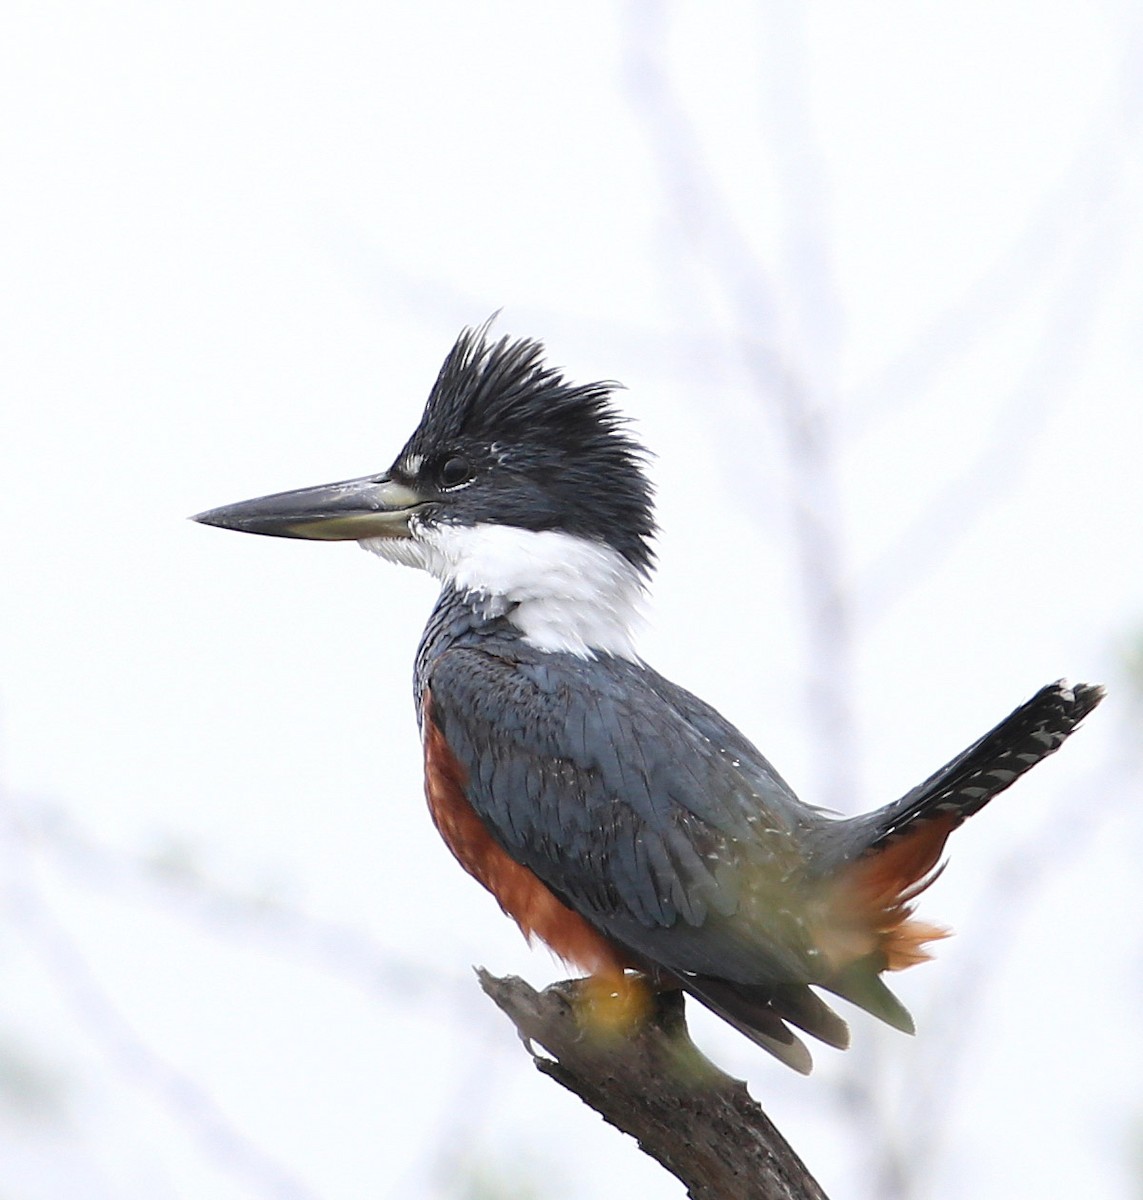 Ringed Kingfisher - Hal and Kirsten Snyder